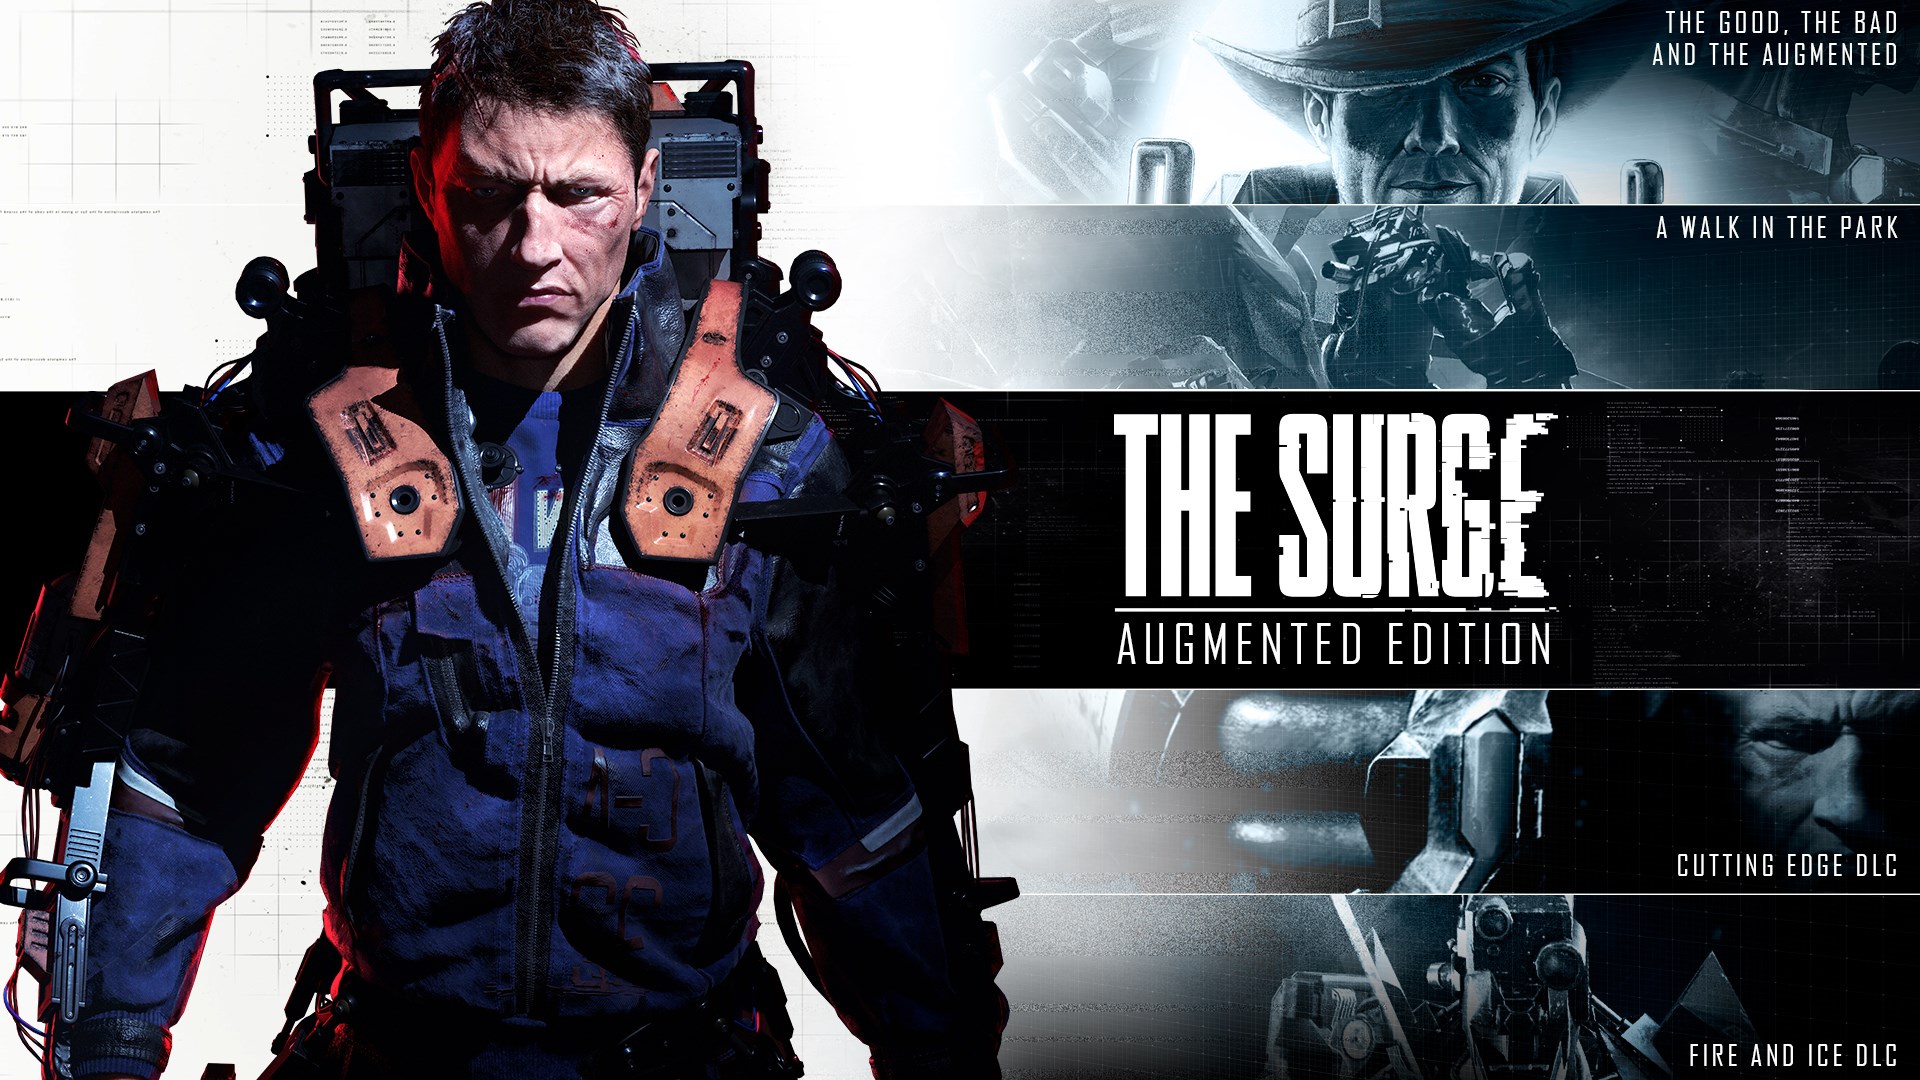 The Surge - Augmented Edition